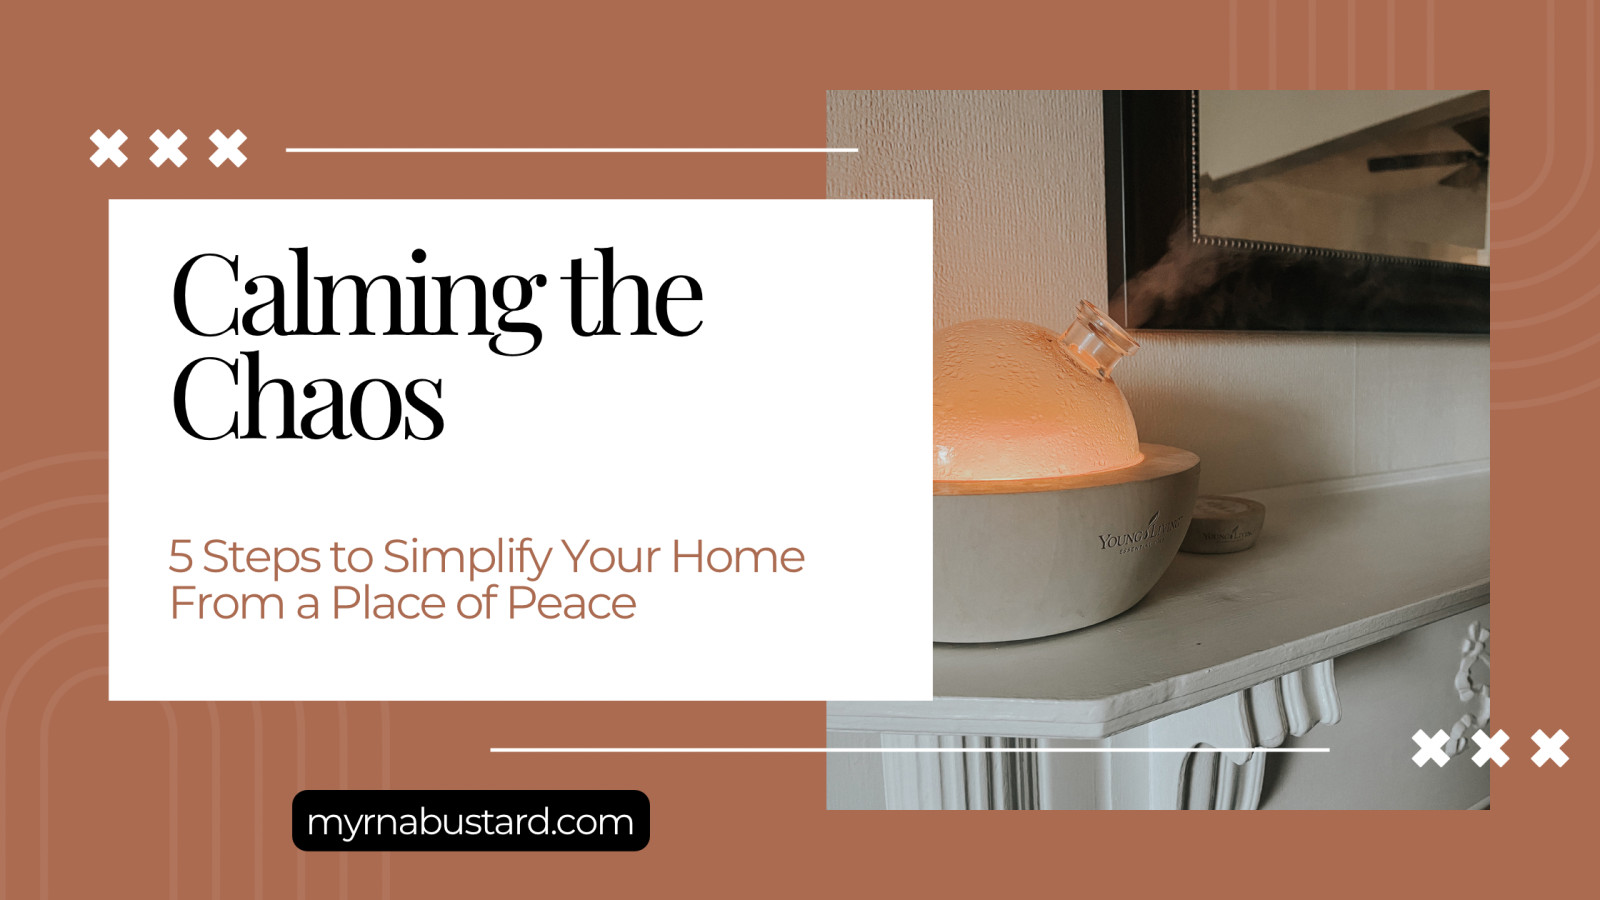 Calming the Chaos: 5 Steps to Simplify Your Home